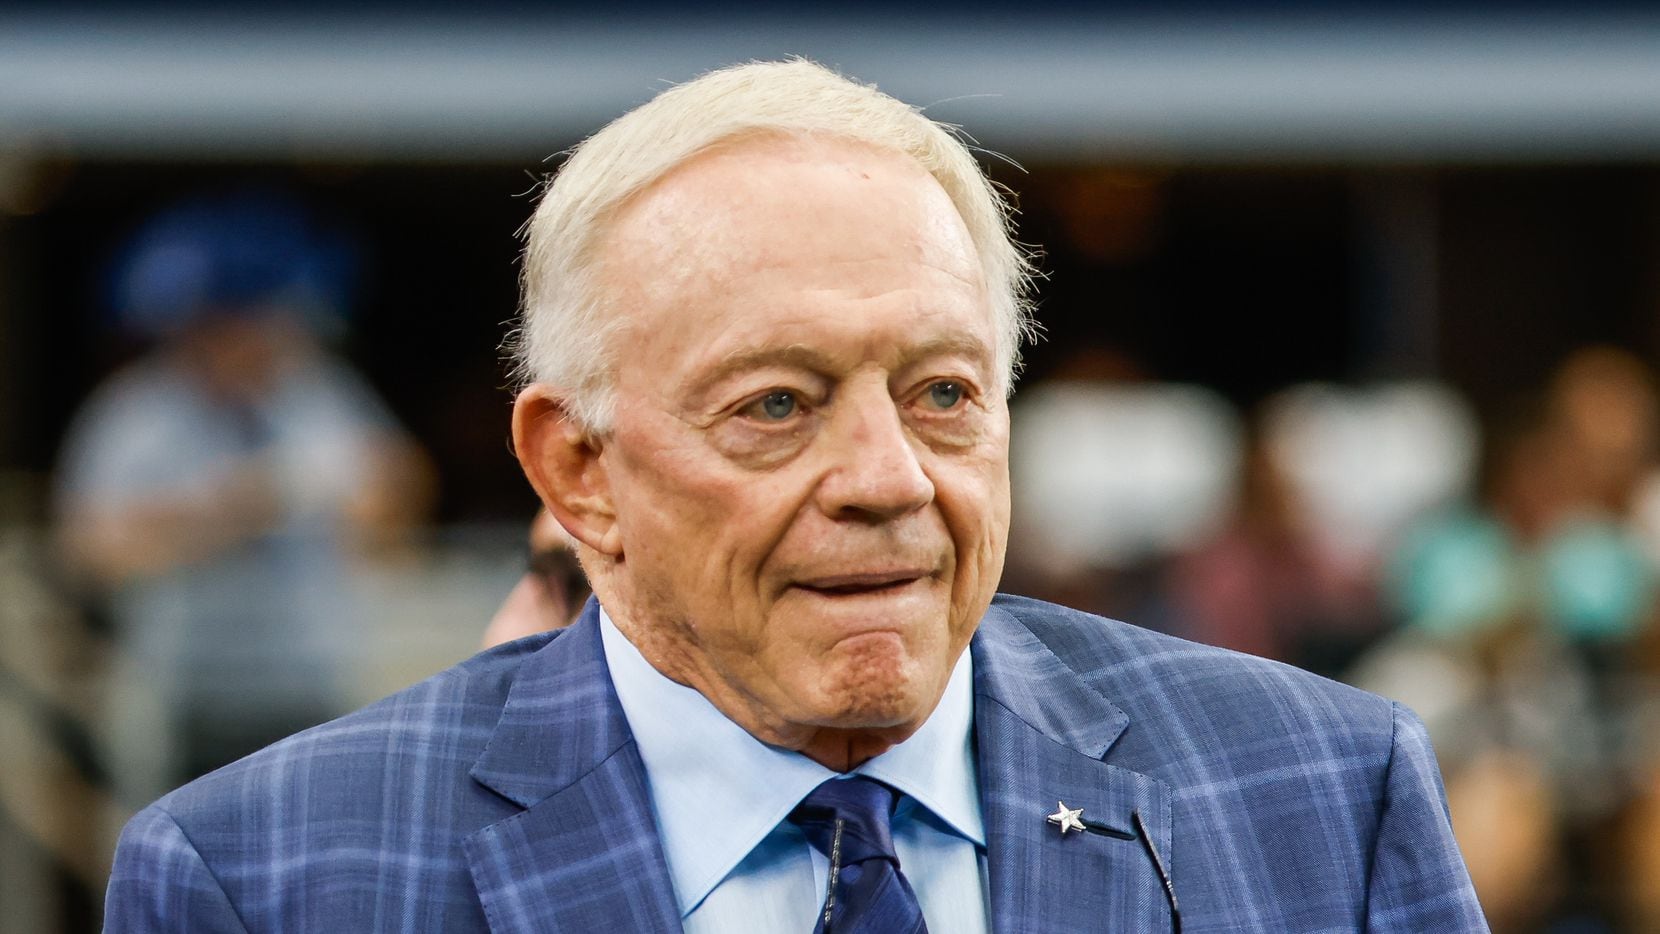 Dallas Cowboys owner Jerry Jones shows up during warmup before the game against Cincinnati...